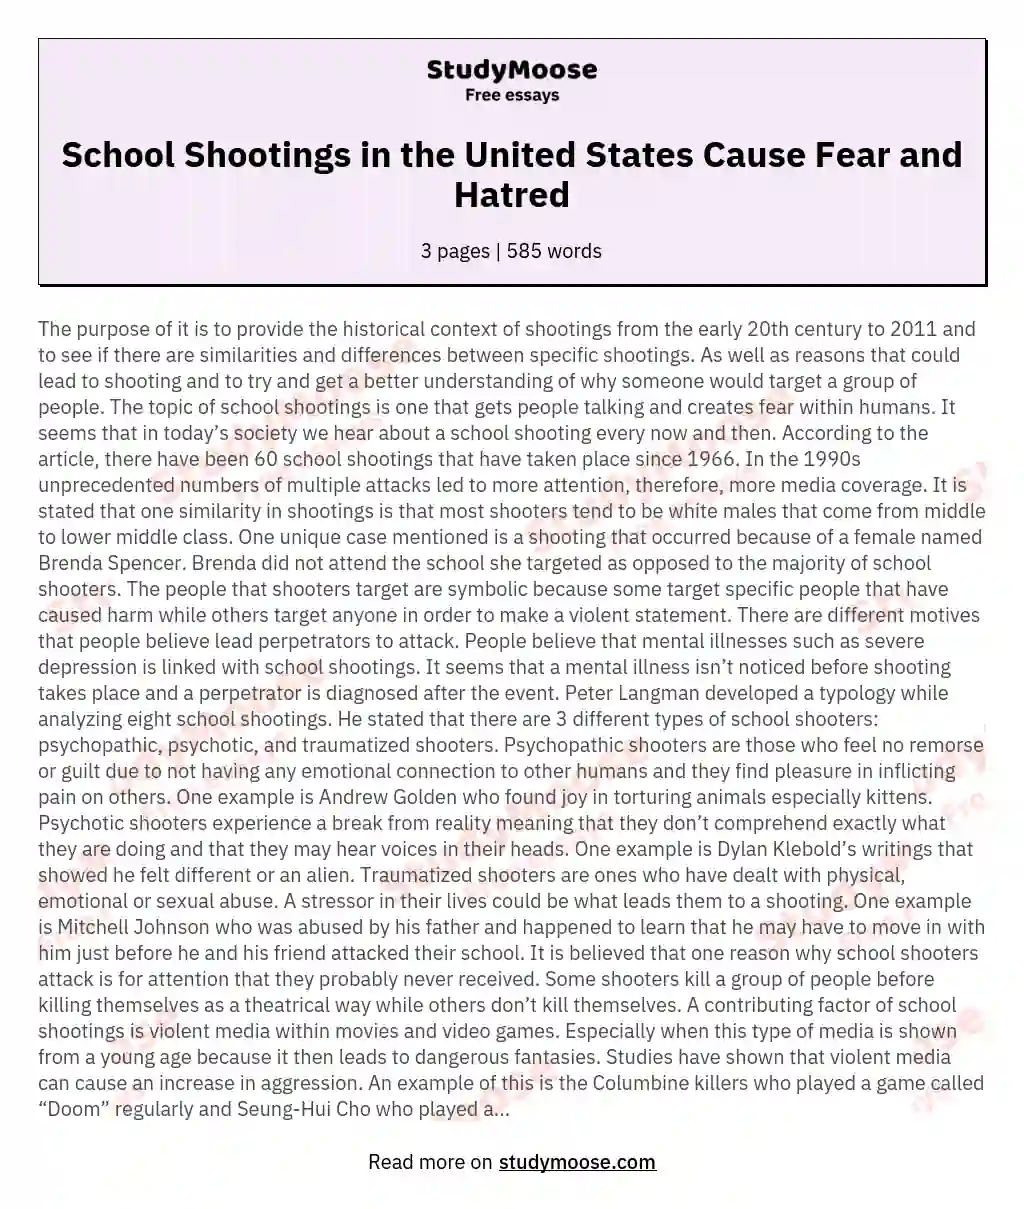 School Shootings in the United States Cause Fear and Hatred